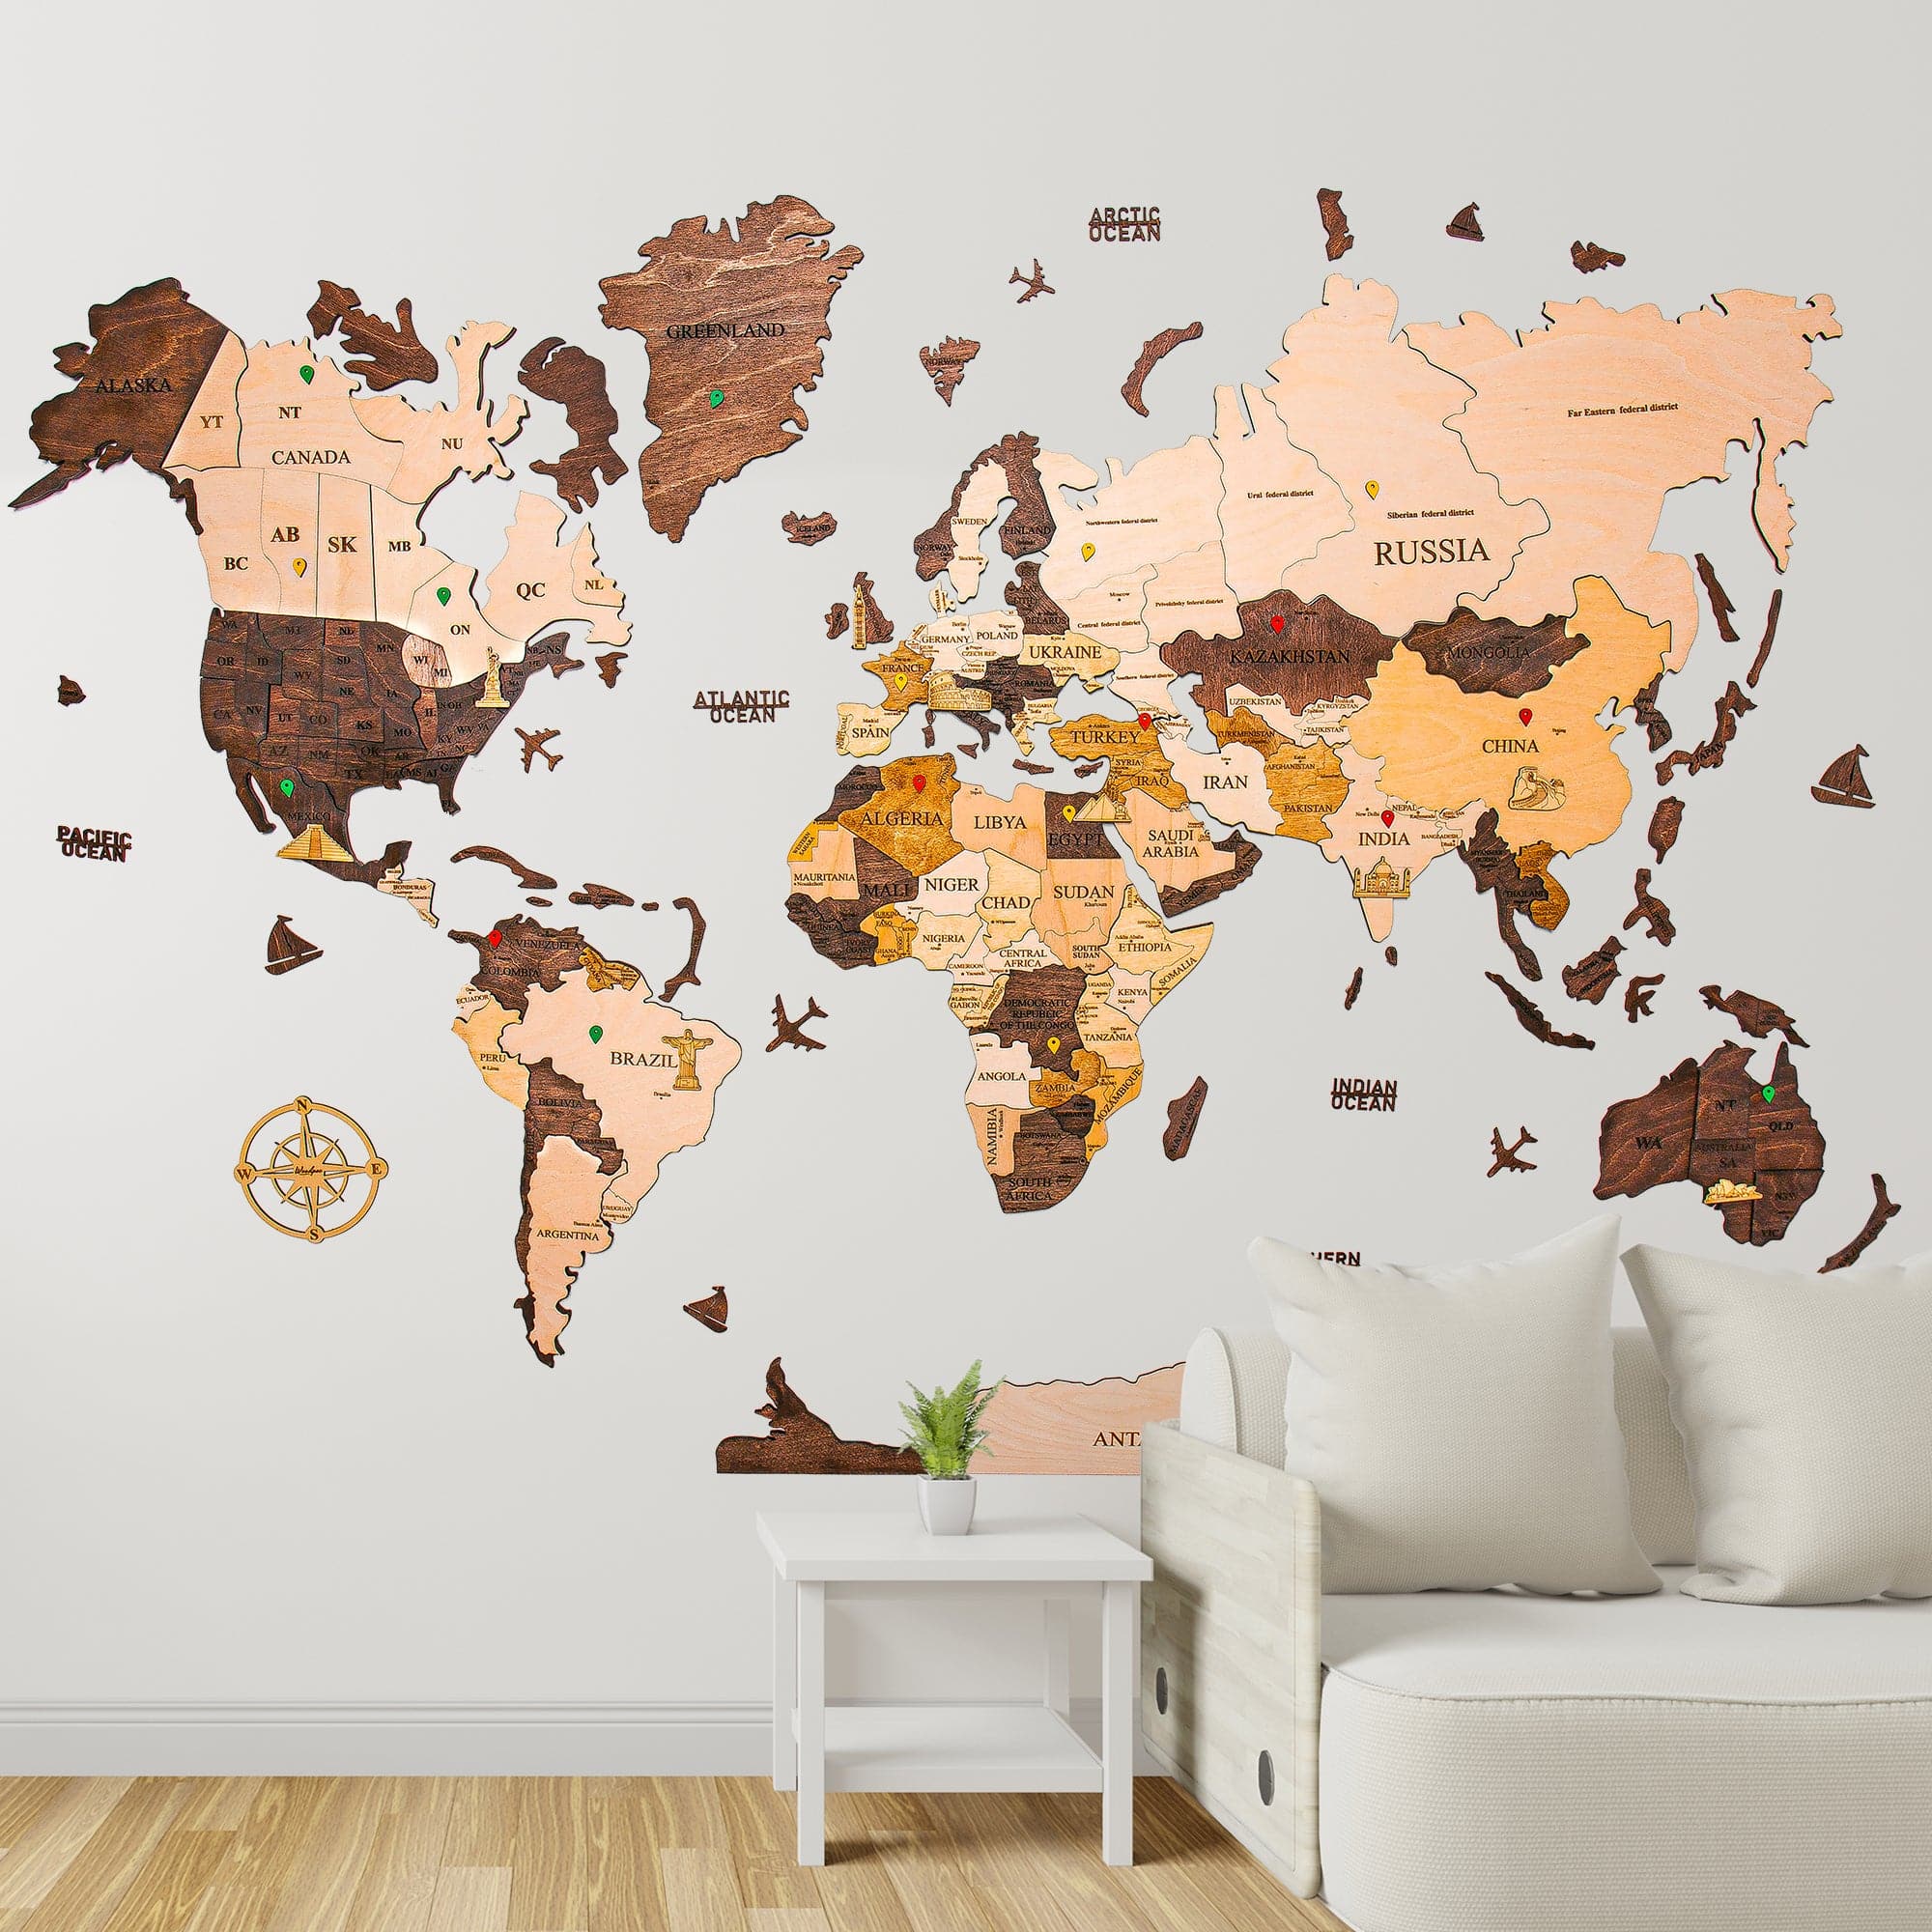 3D Wooden World Map - Multicolored 04 L Blank Map